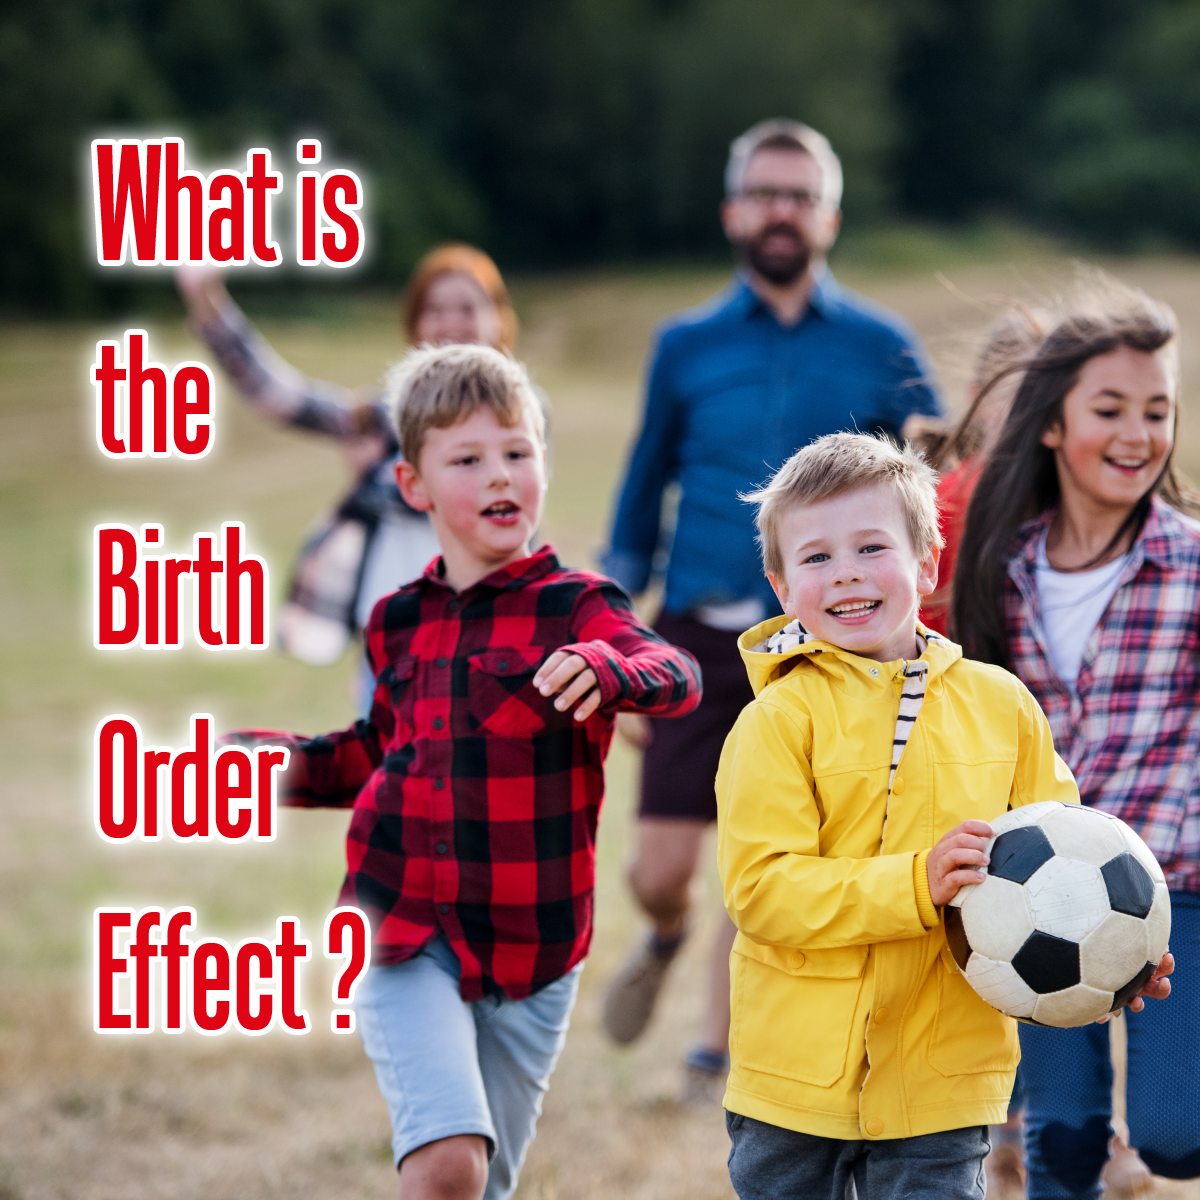 What’s the birth order effect?